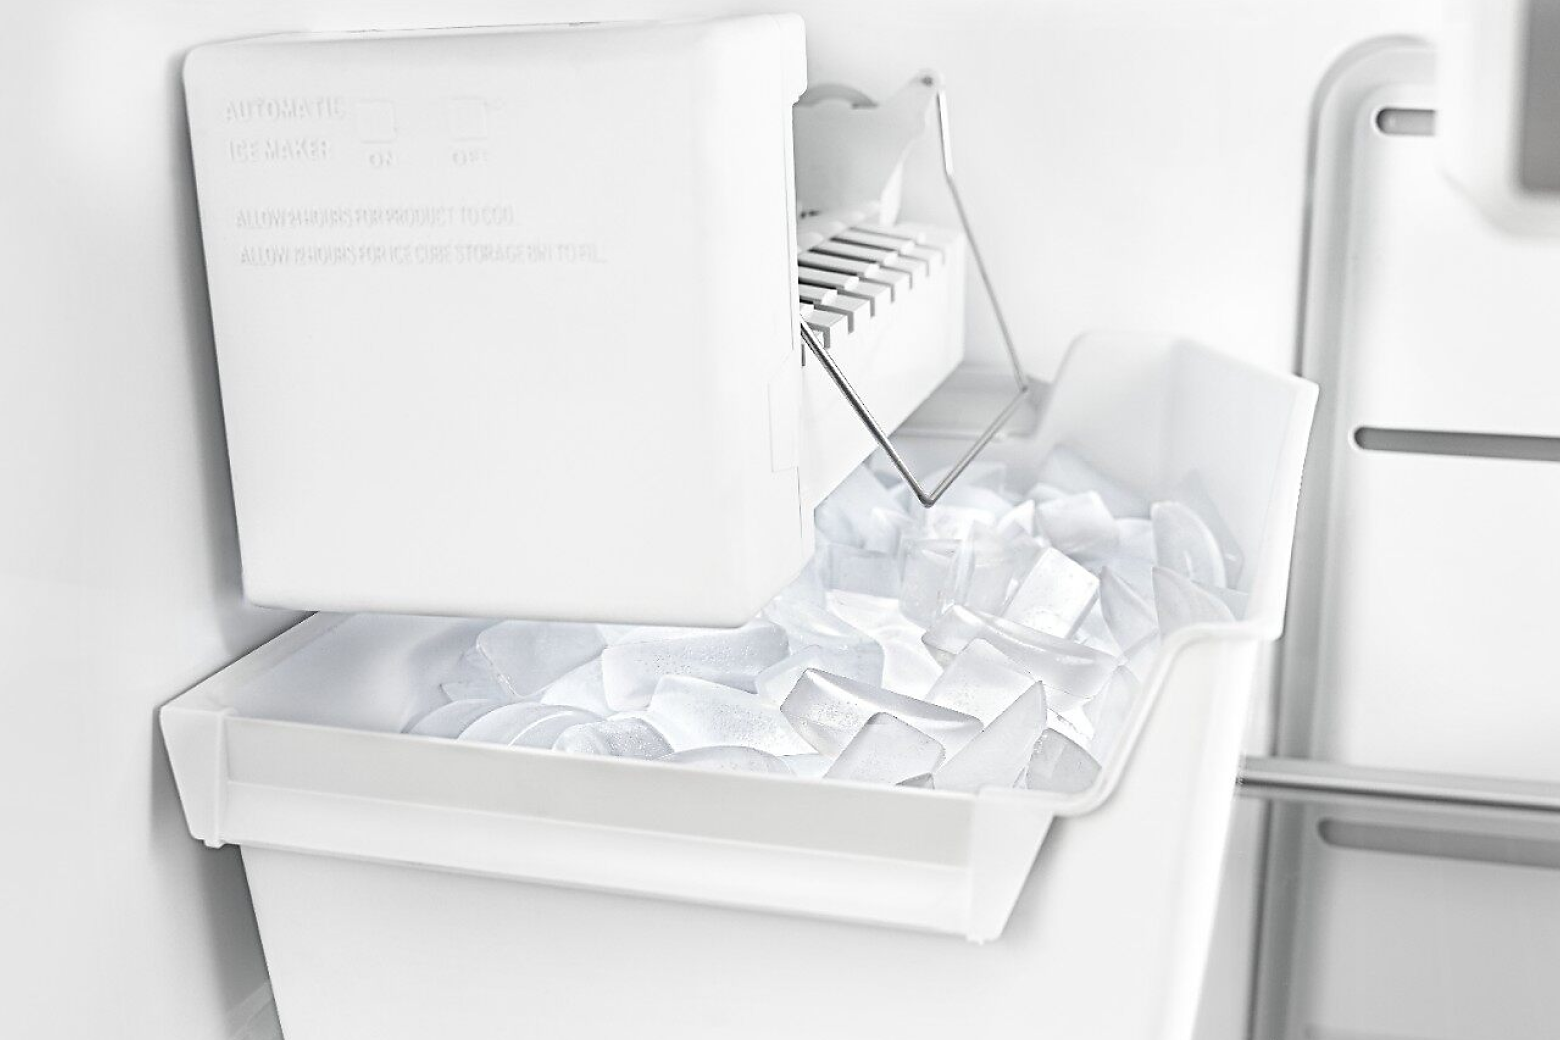 White ice maker inside freezer compartment with full ice bin